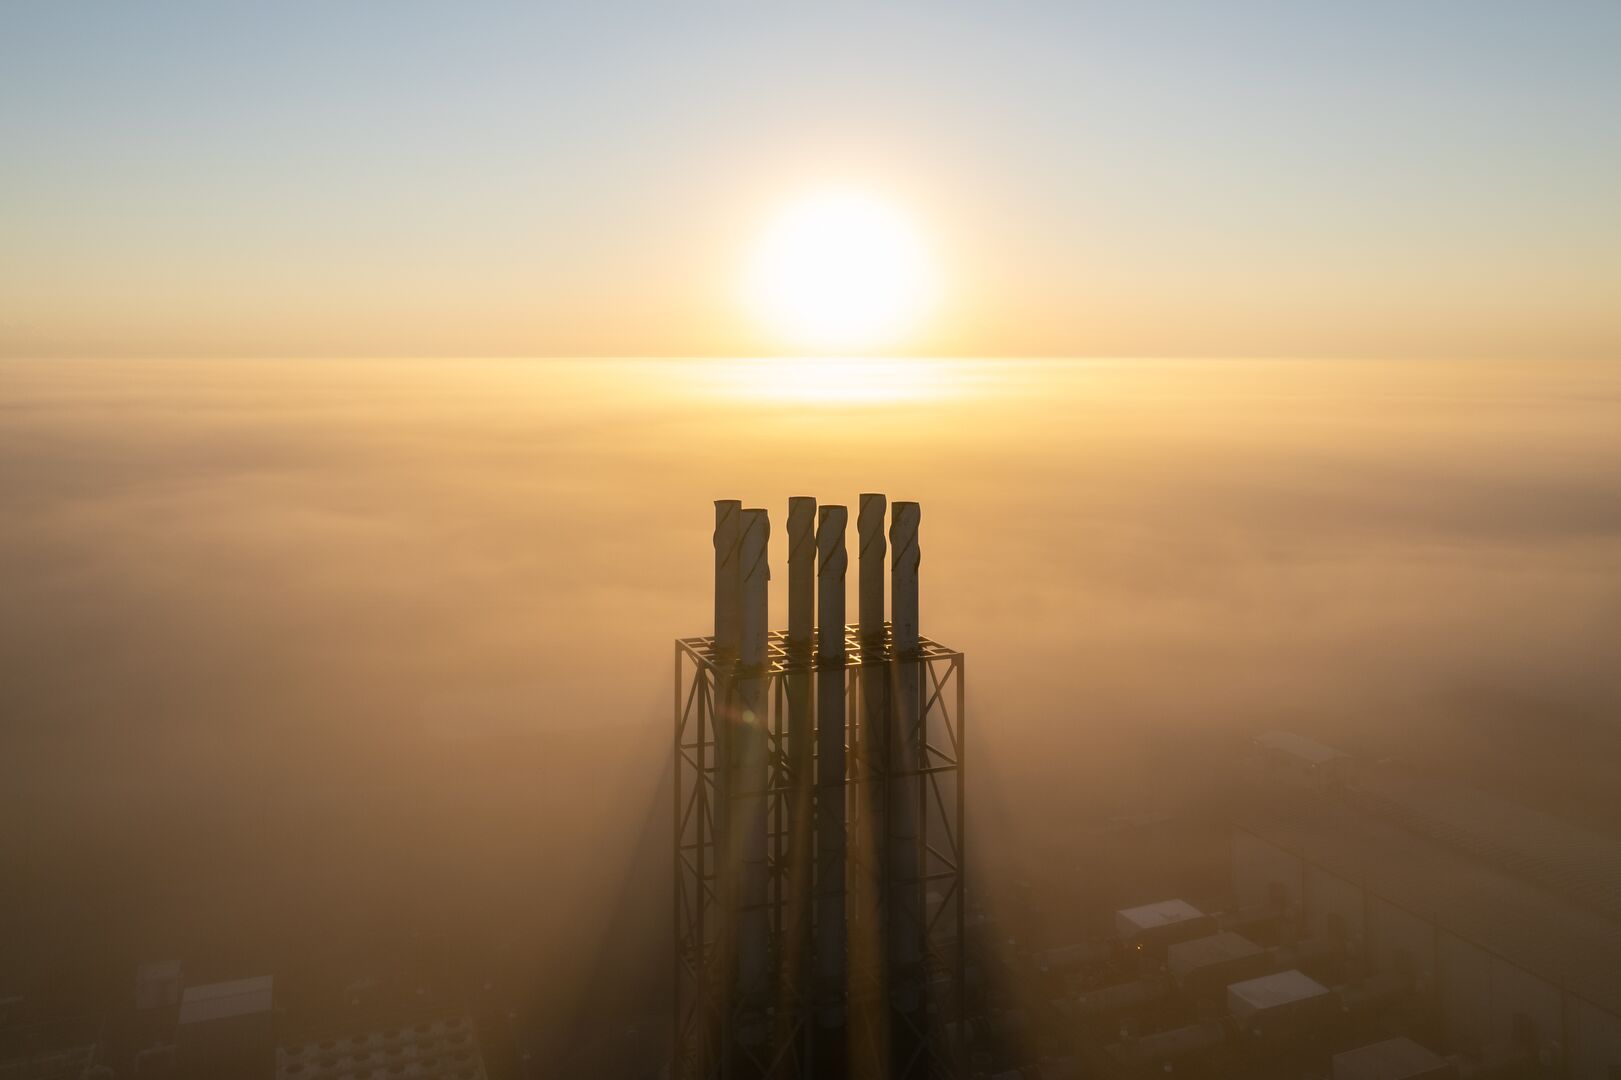 Sun shining on the stacks of a power plant